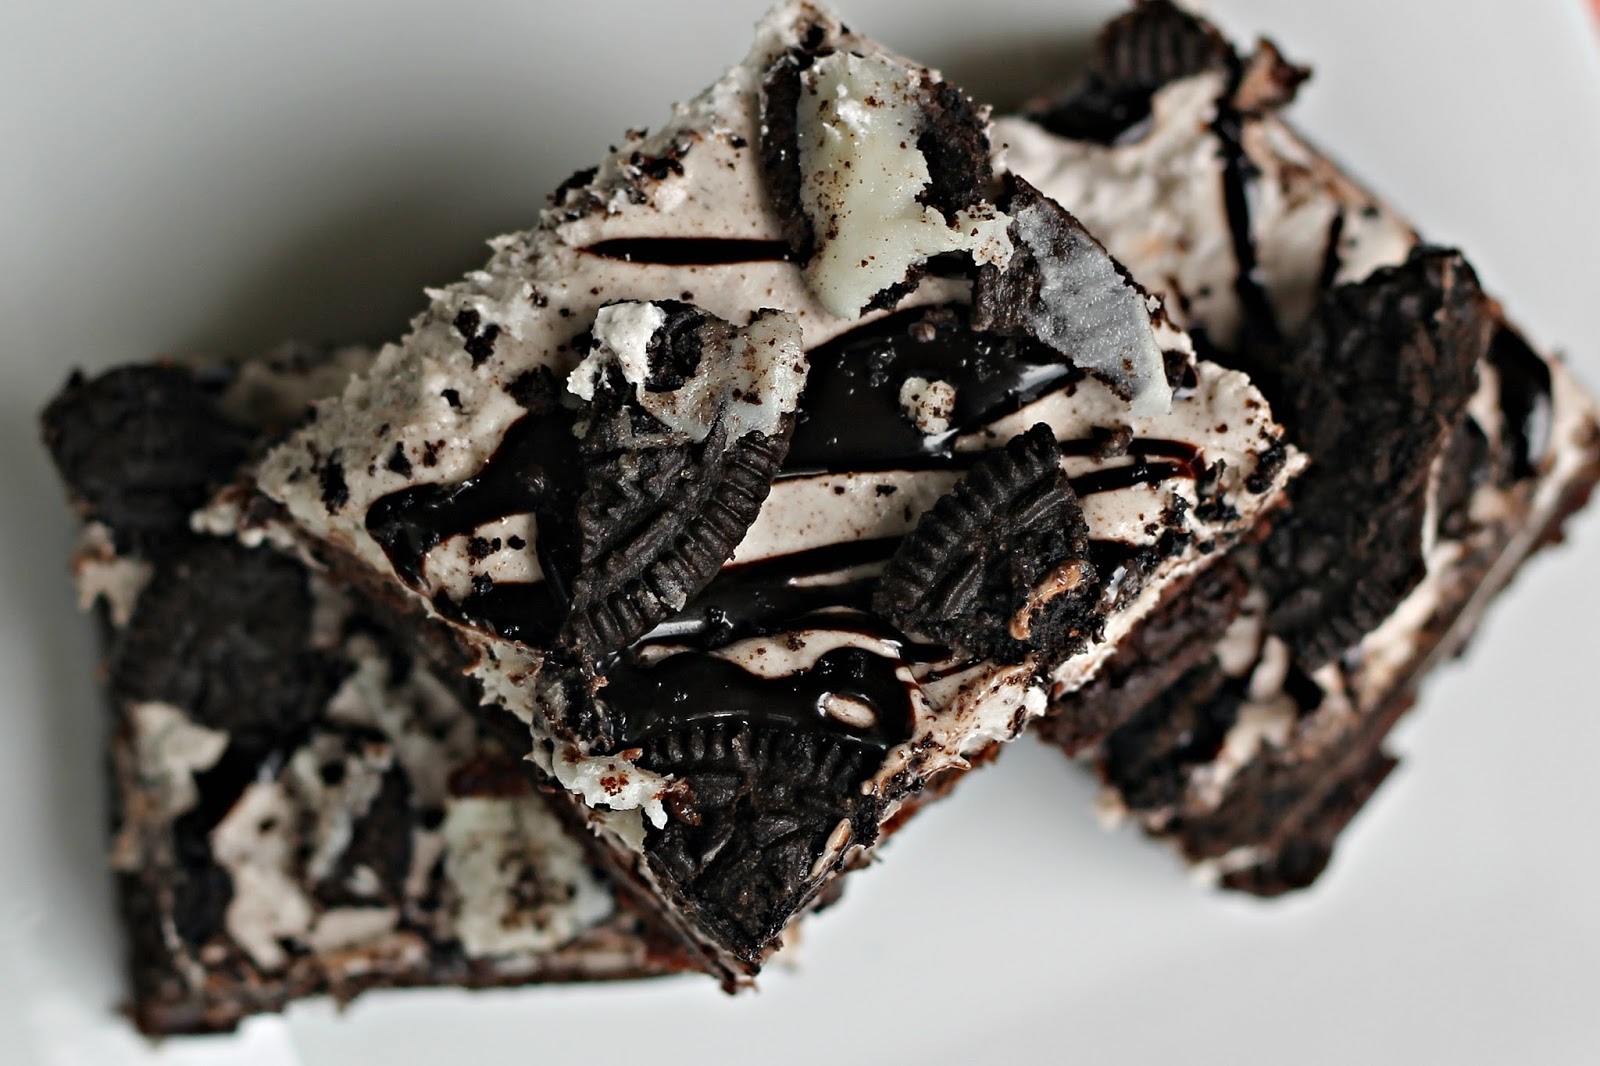 What is an Oreo brownie recipe?